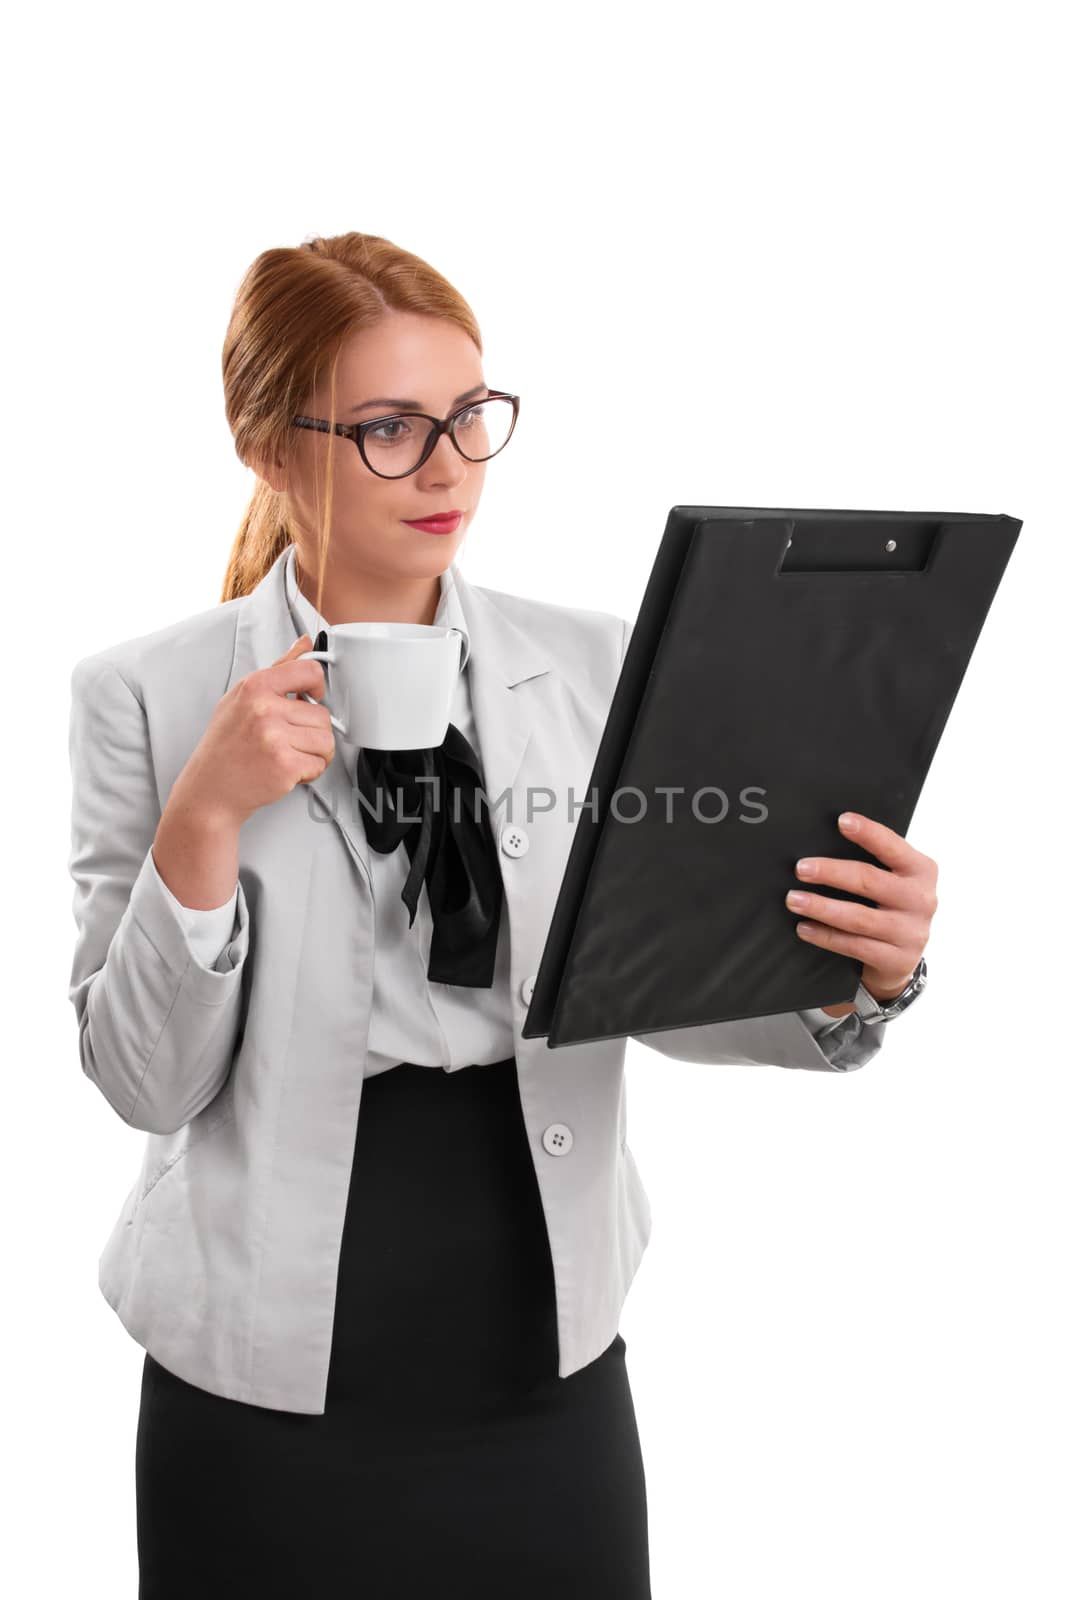 Morning meeting preparation. A portrait of a businesswoman, holding a cup of coffee and a clipboard, isolated on white background.